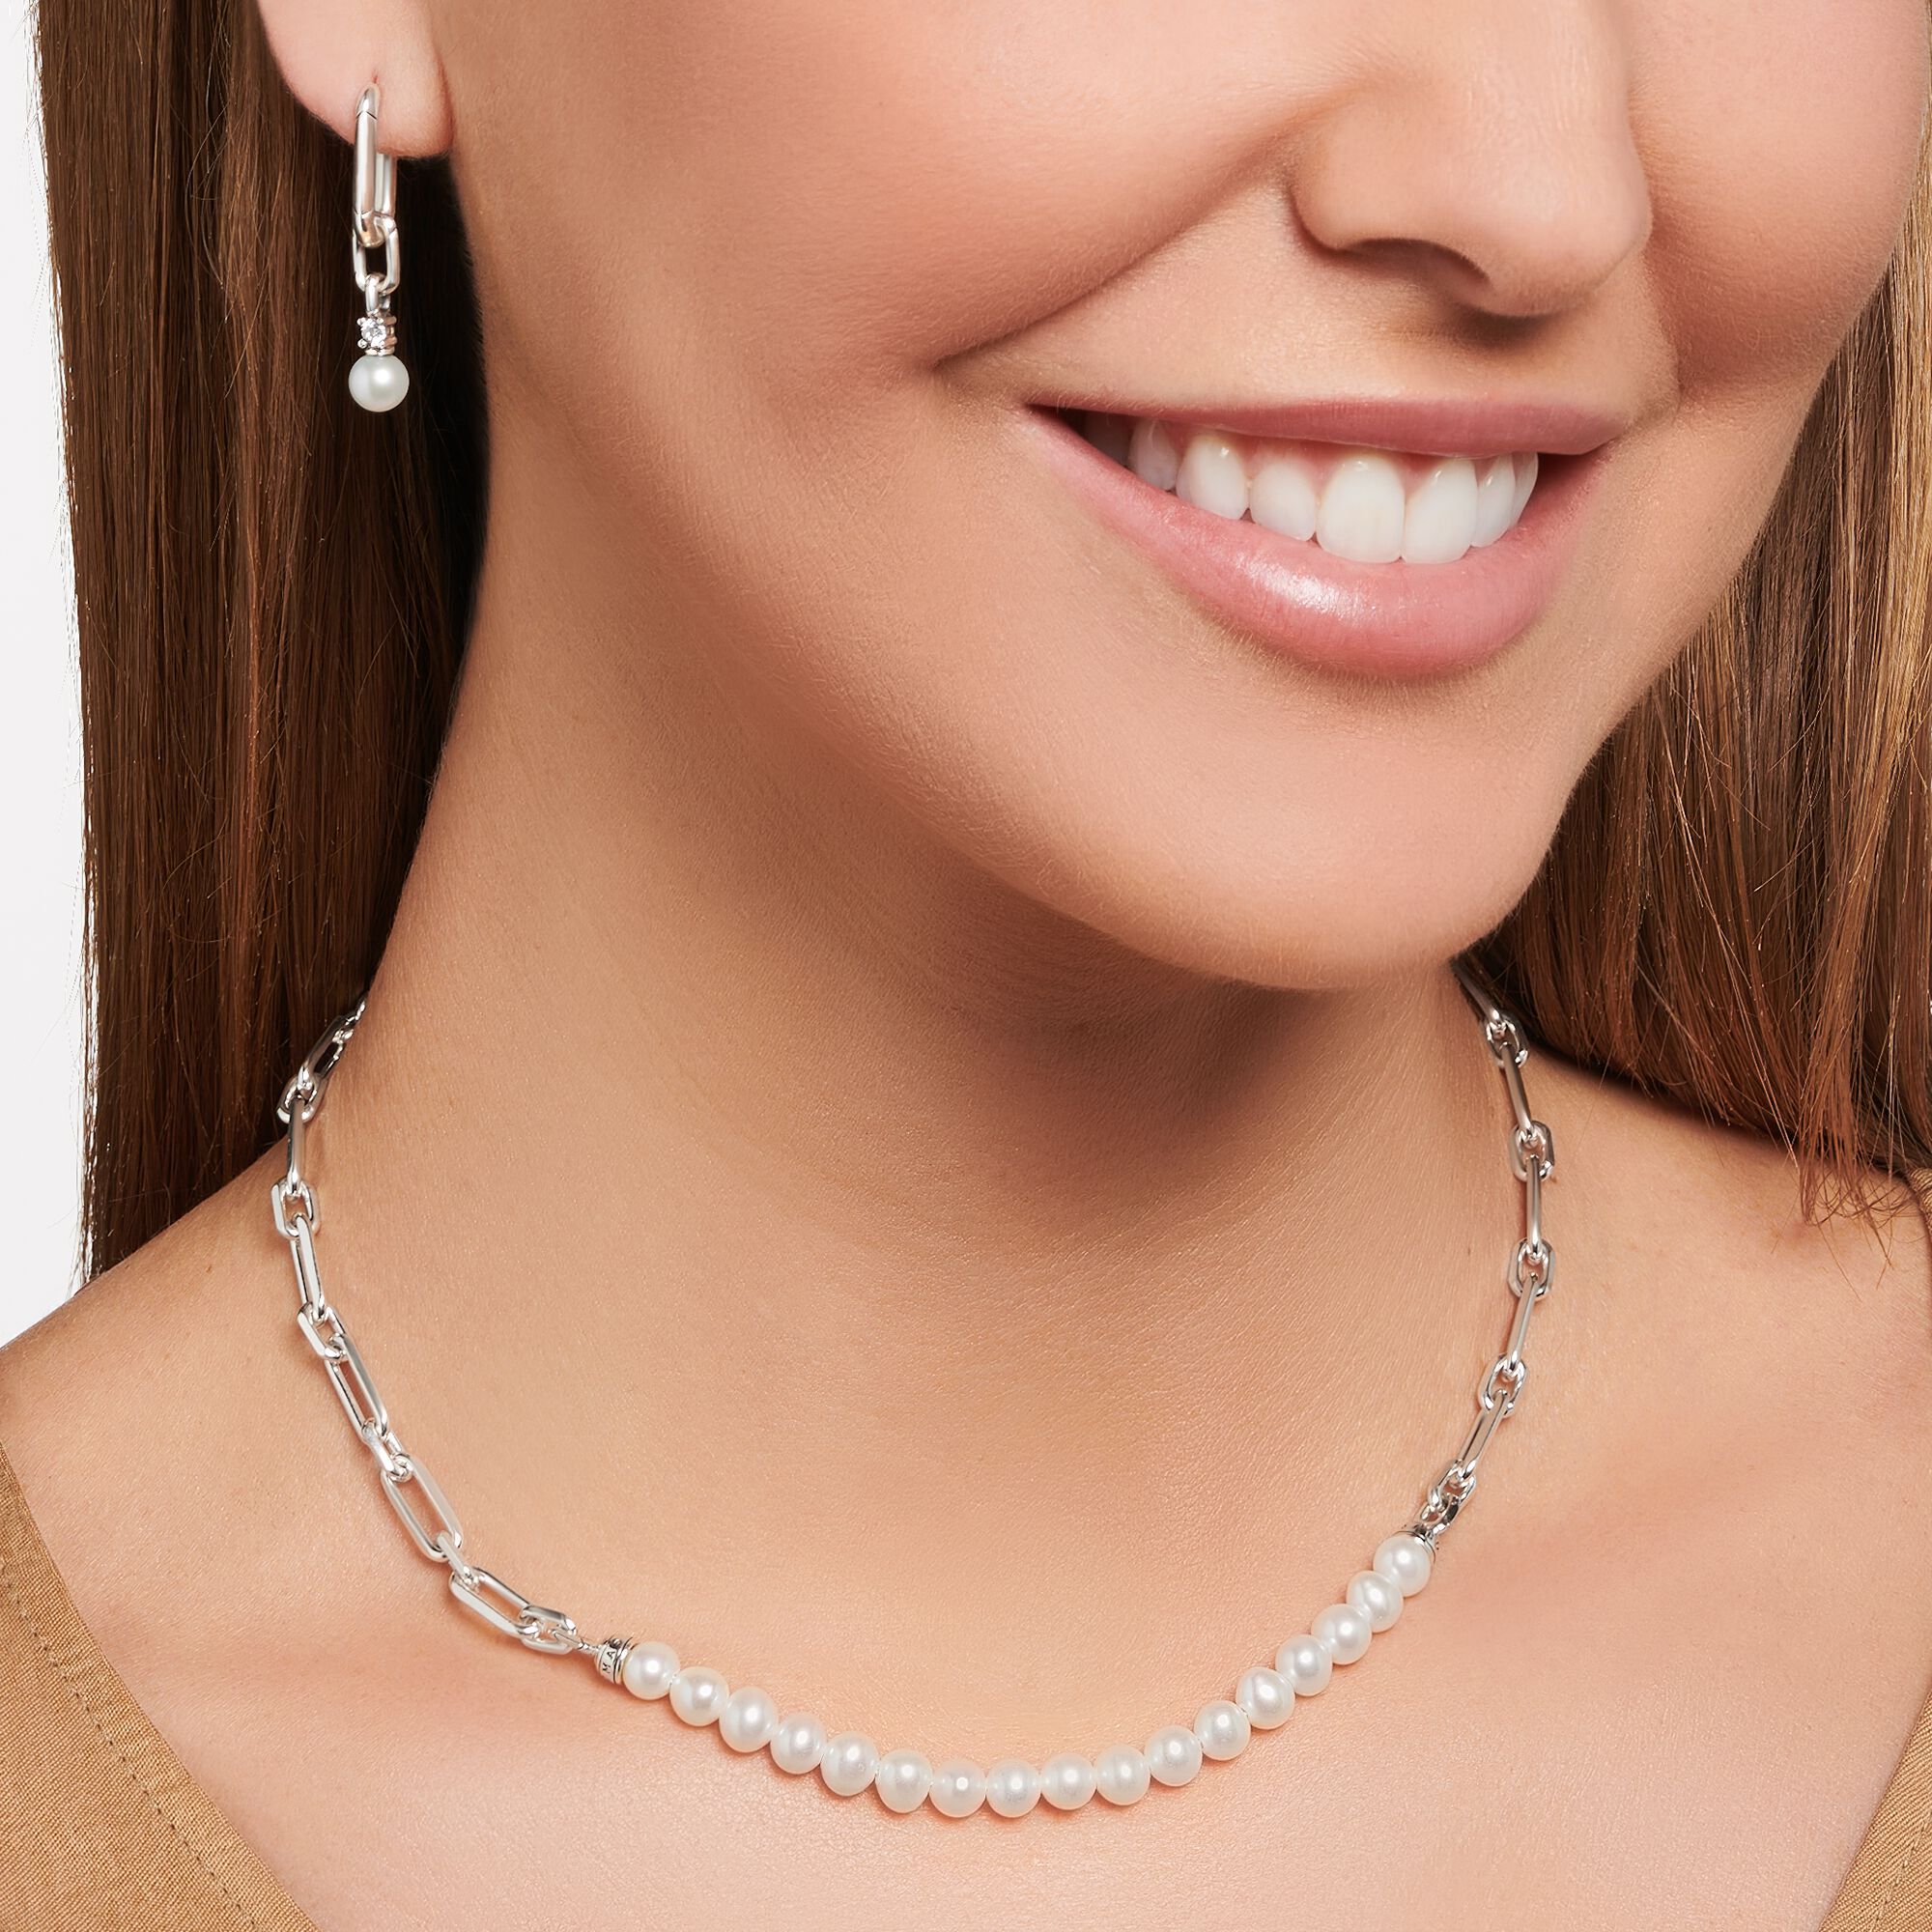 Necklace with pearls in white, turquoise, blue – THOMAS SABO